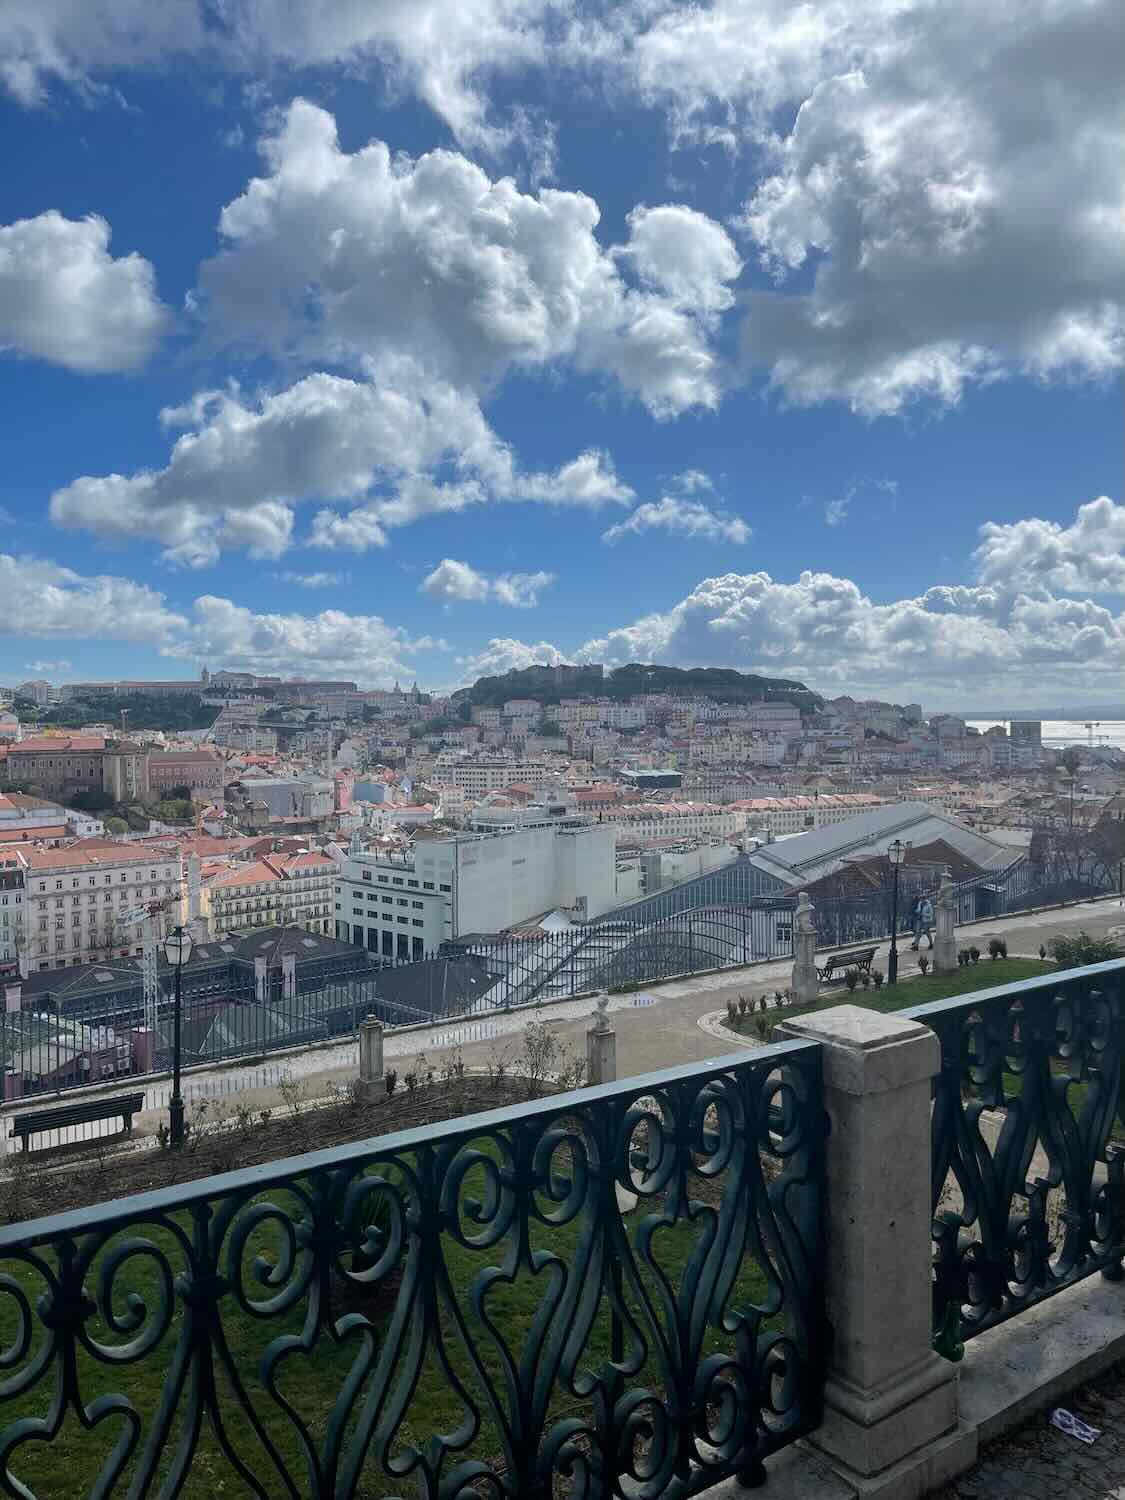 A panoramic view from a vantage point in Lisbon, showing the cityscape with its historic buildings under a dramatic cloud-filled sky.